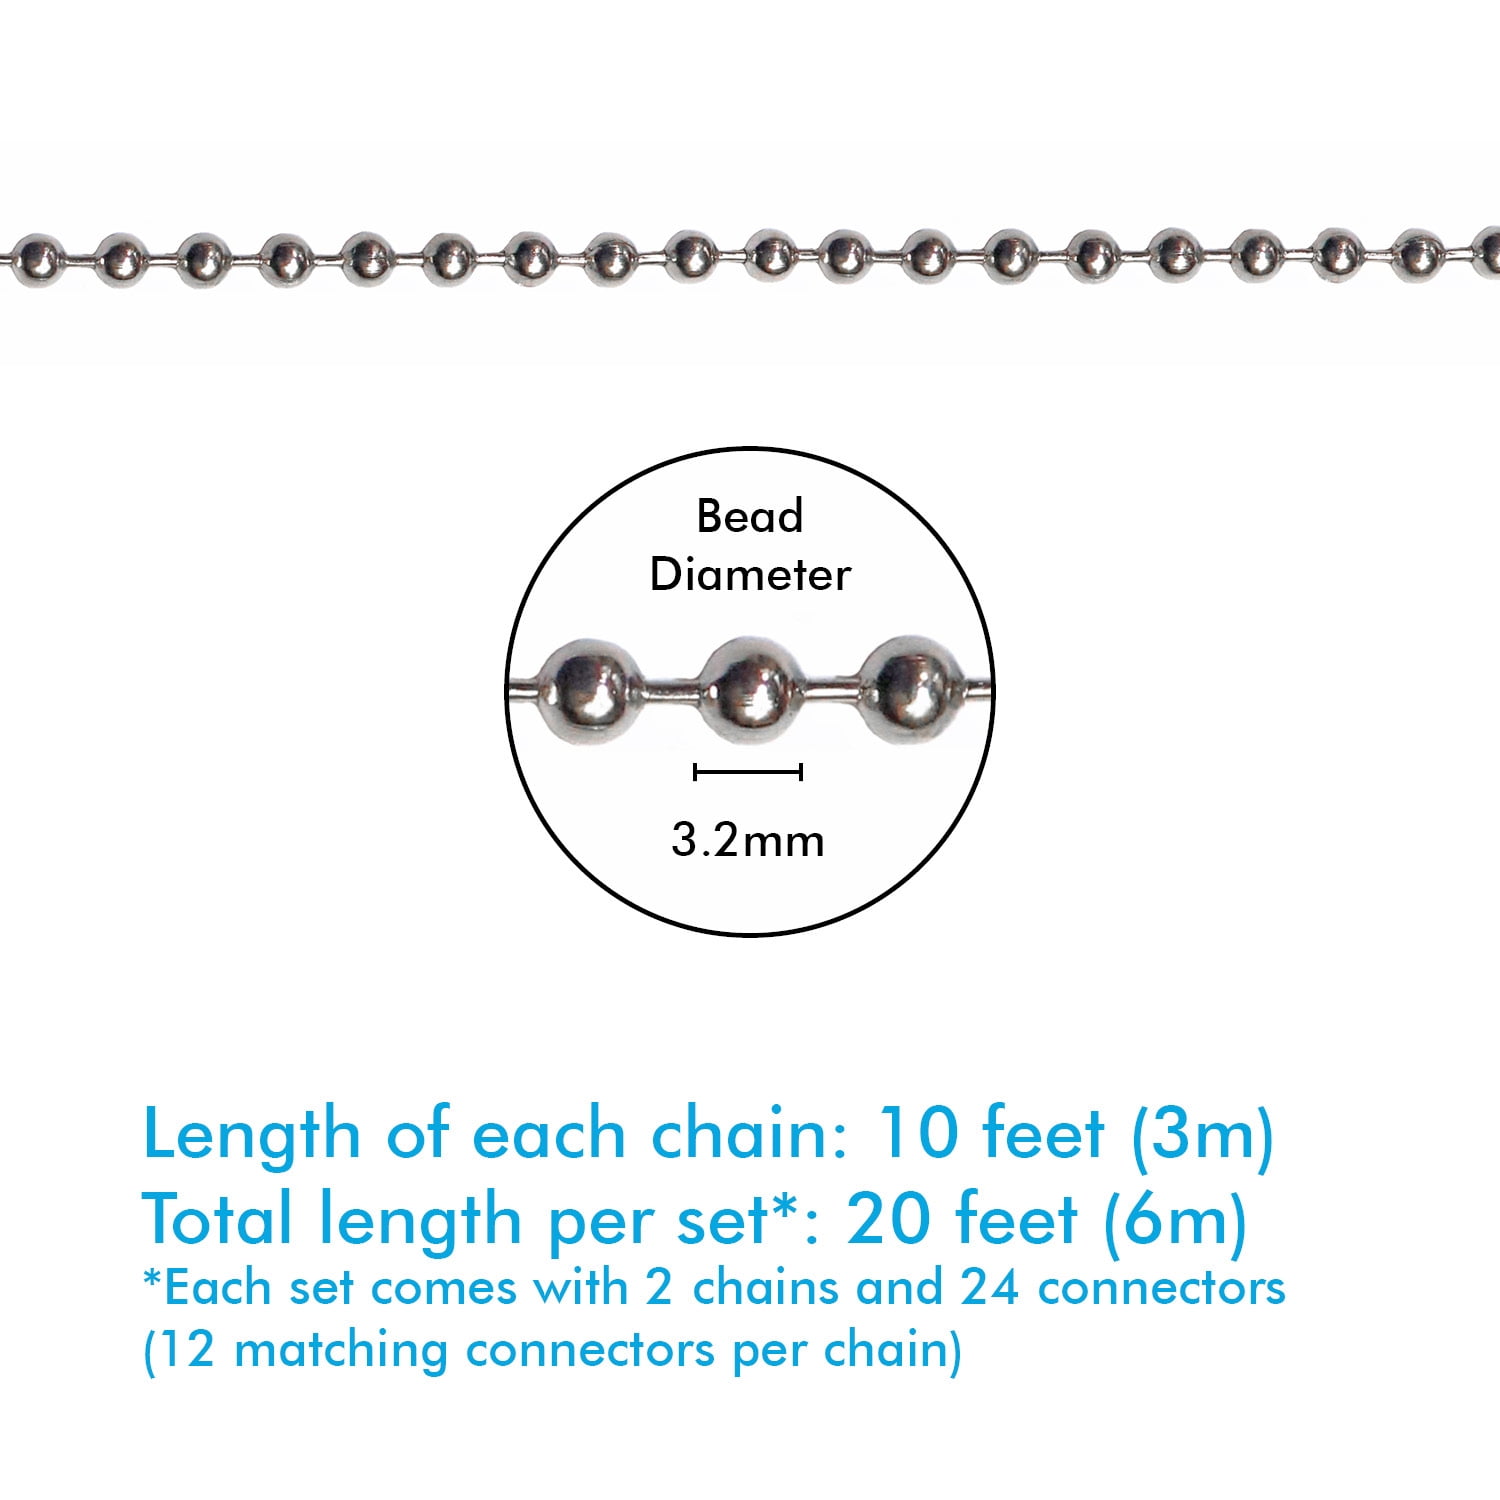 INORS C1SYQDP 3.2 mm Diameter Beaded Pull Chain Extension with Connector,  10 Feet Beaded Roller Chain with 12 Matching Connectors for